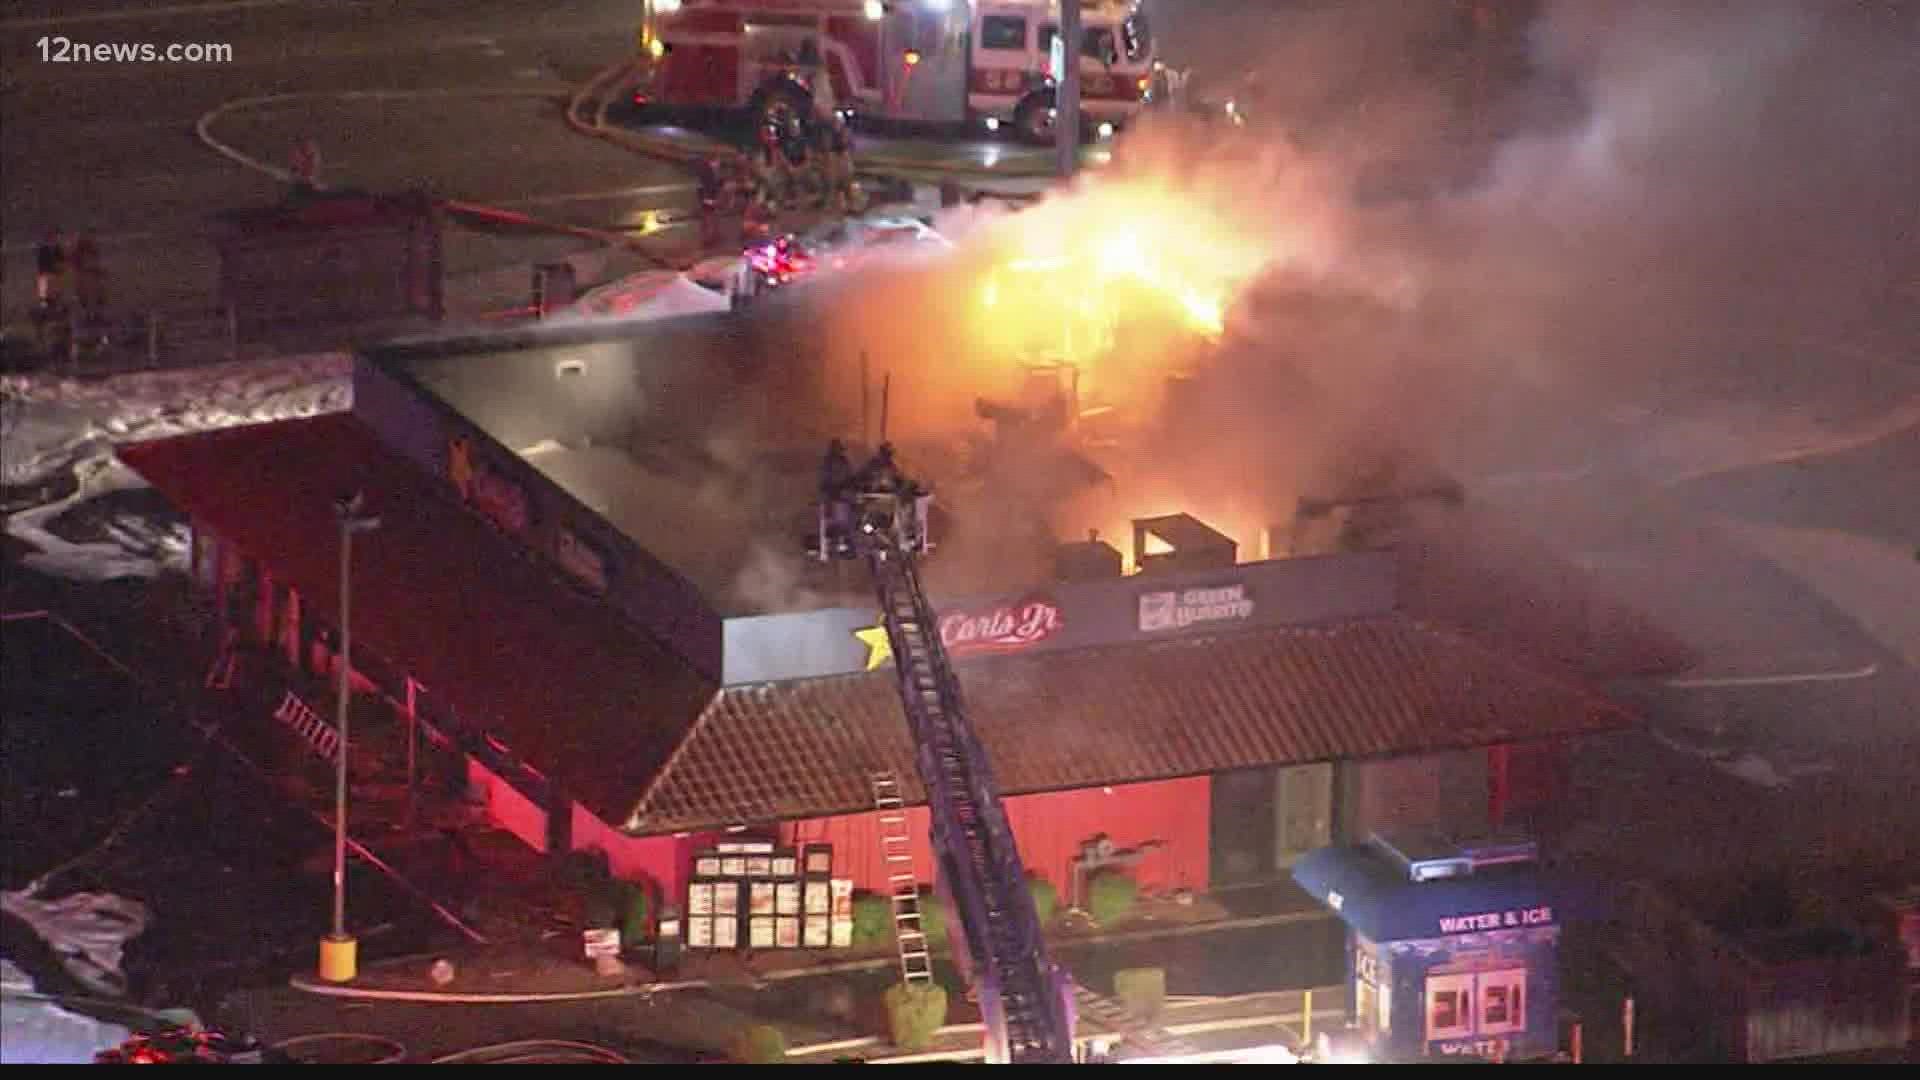 Hot spots have been extinguished at the restaurant fire overnight, firefighters said. No one was injured and officials are investigating the cause.